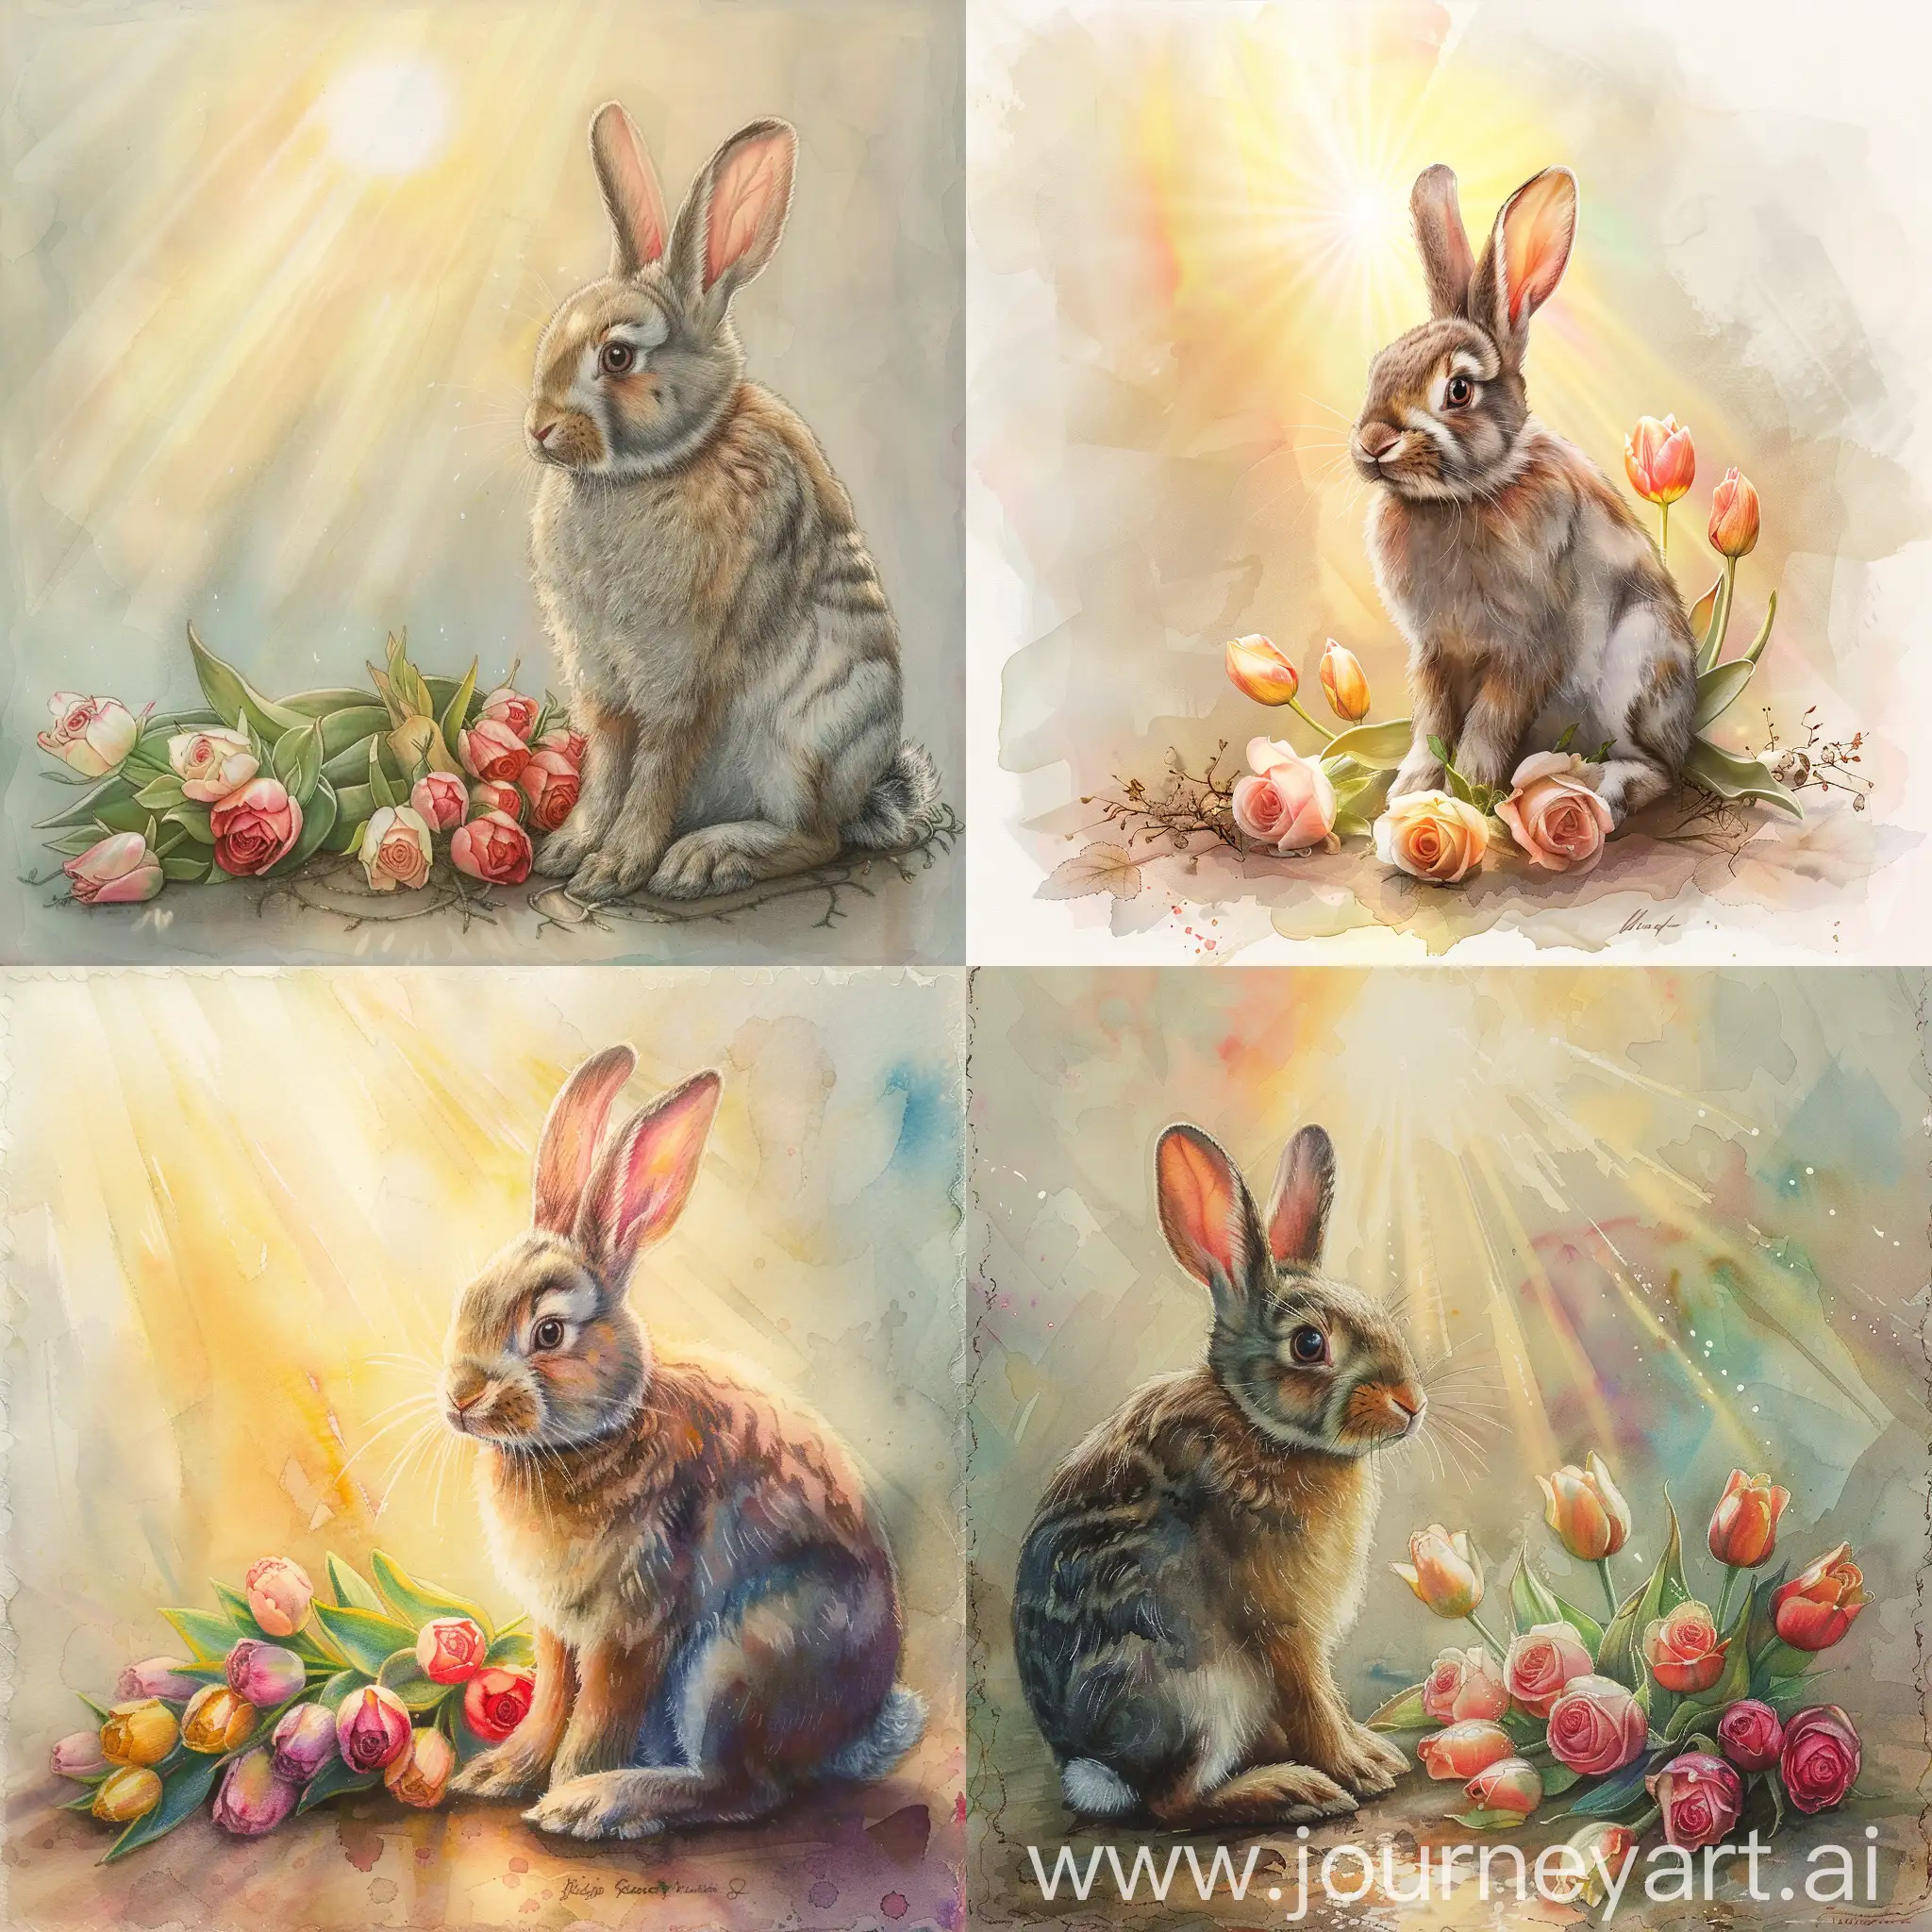 a rabbit sits, around a small number of roses and tulips, behind him is the glow of sunlight, painted in watercolors, soft pastel colors